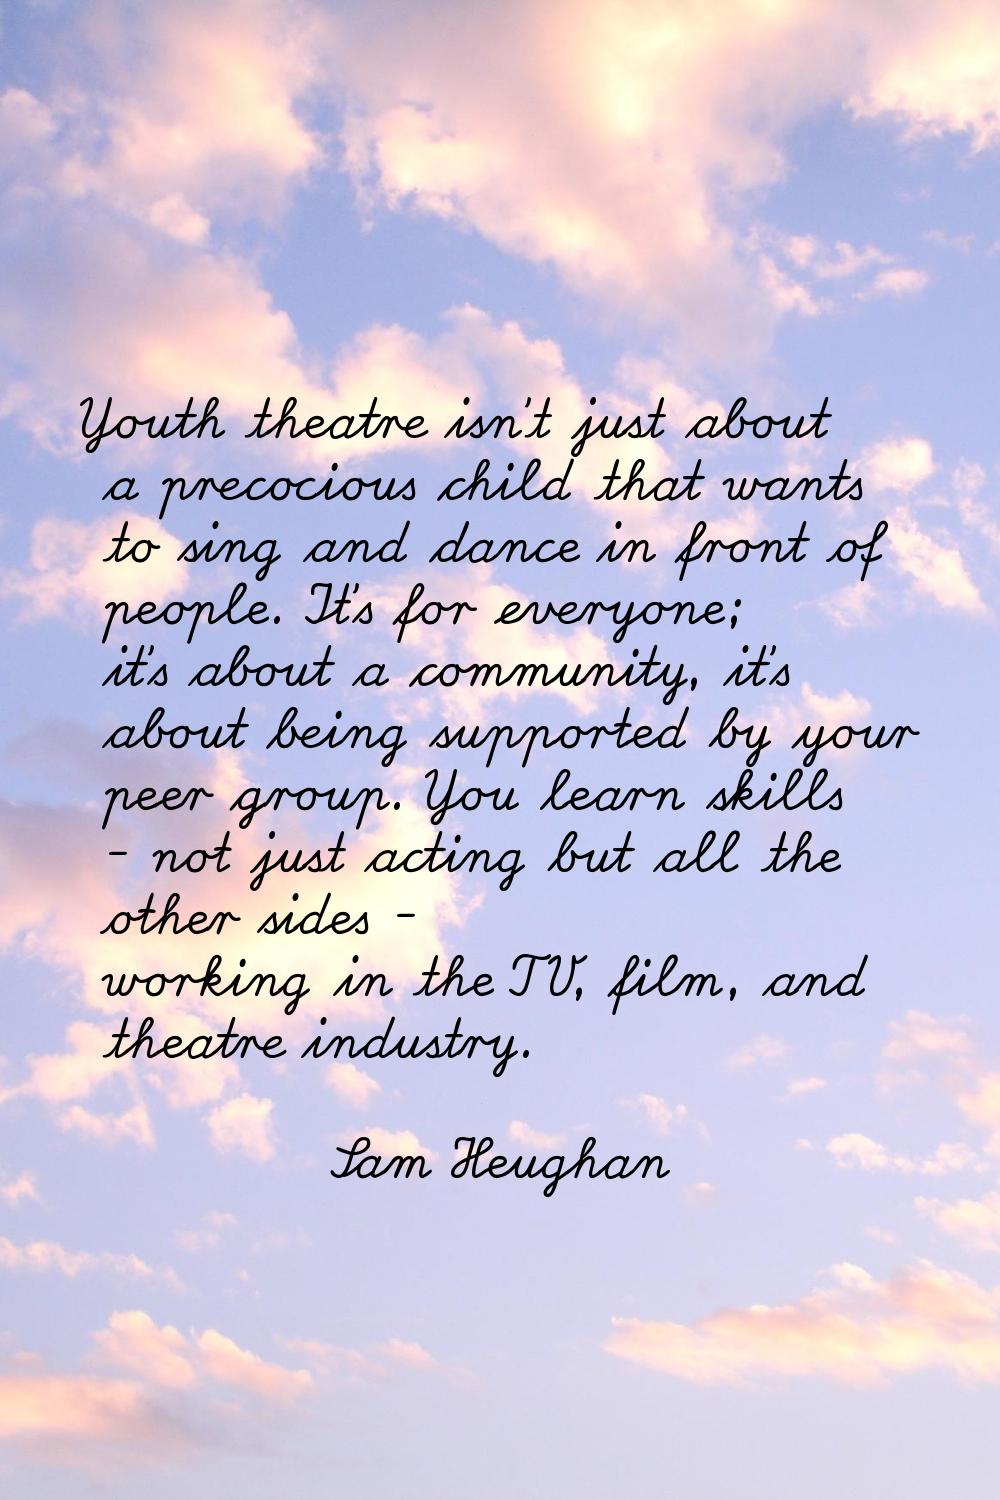 Youth theatre isn't just about a precocious child that wants to sing and dance in front of people. 